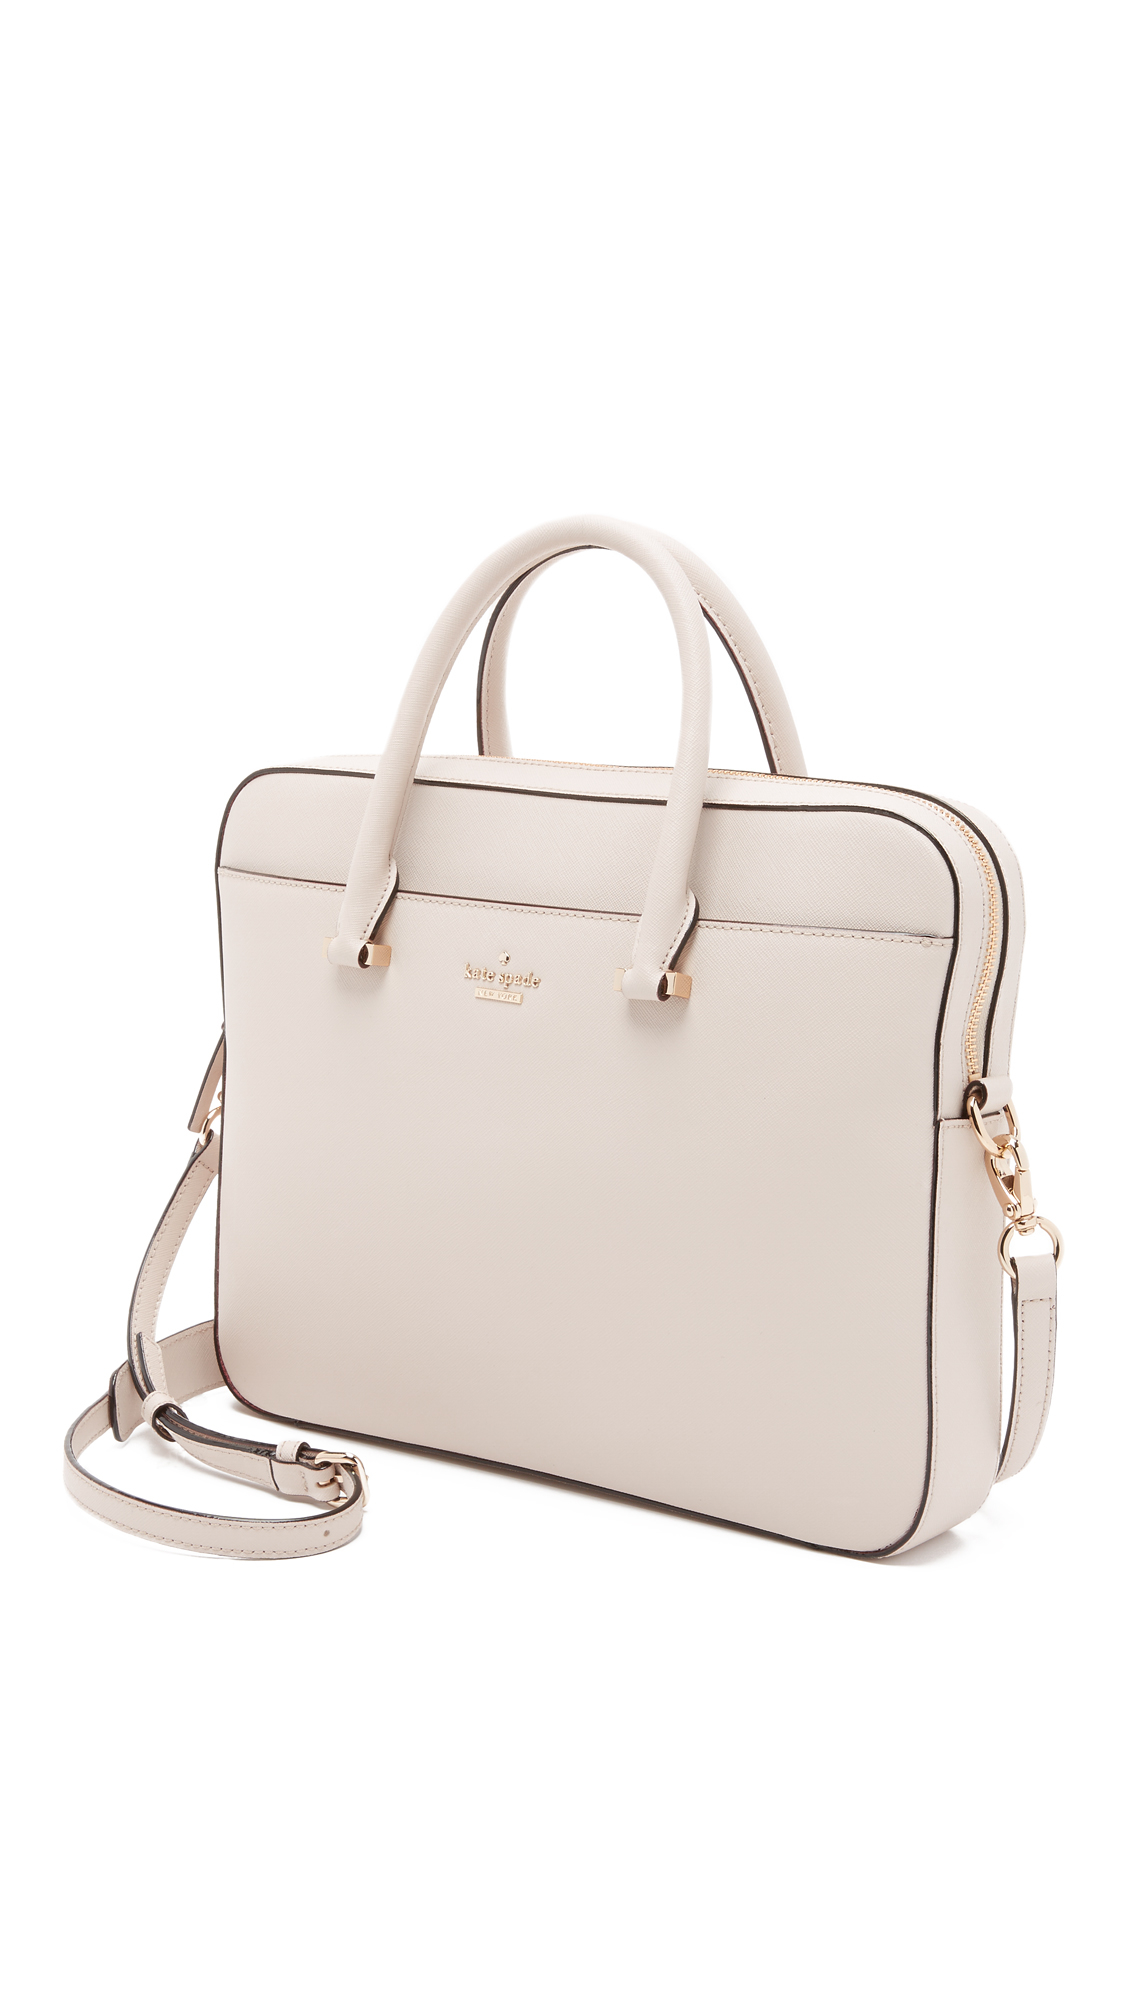 Kate Spade Leather 13 Inch Saffiano Laptop Bag in Natural - Lyst